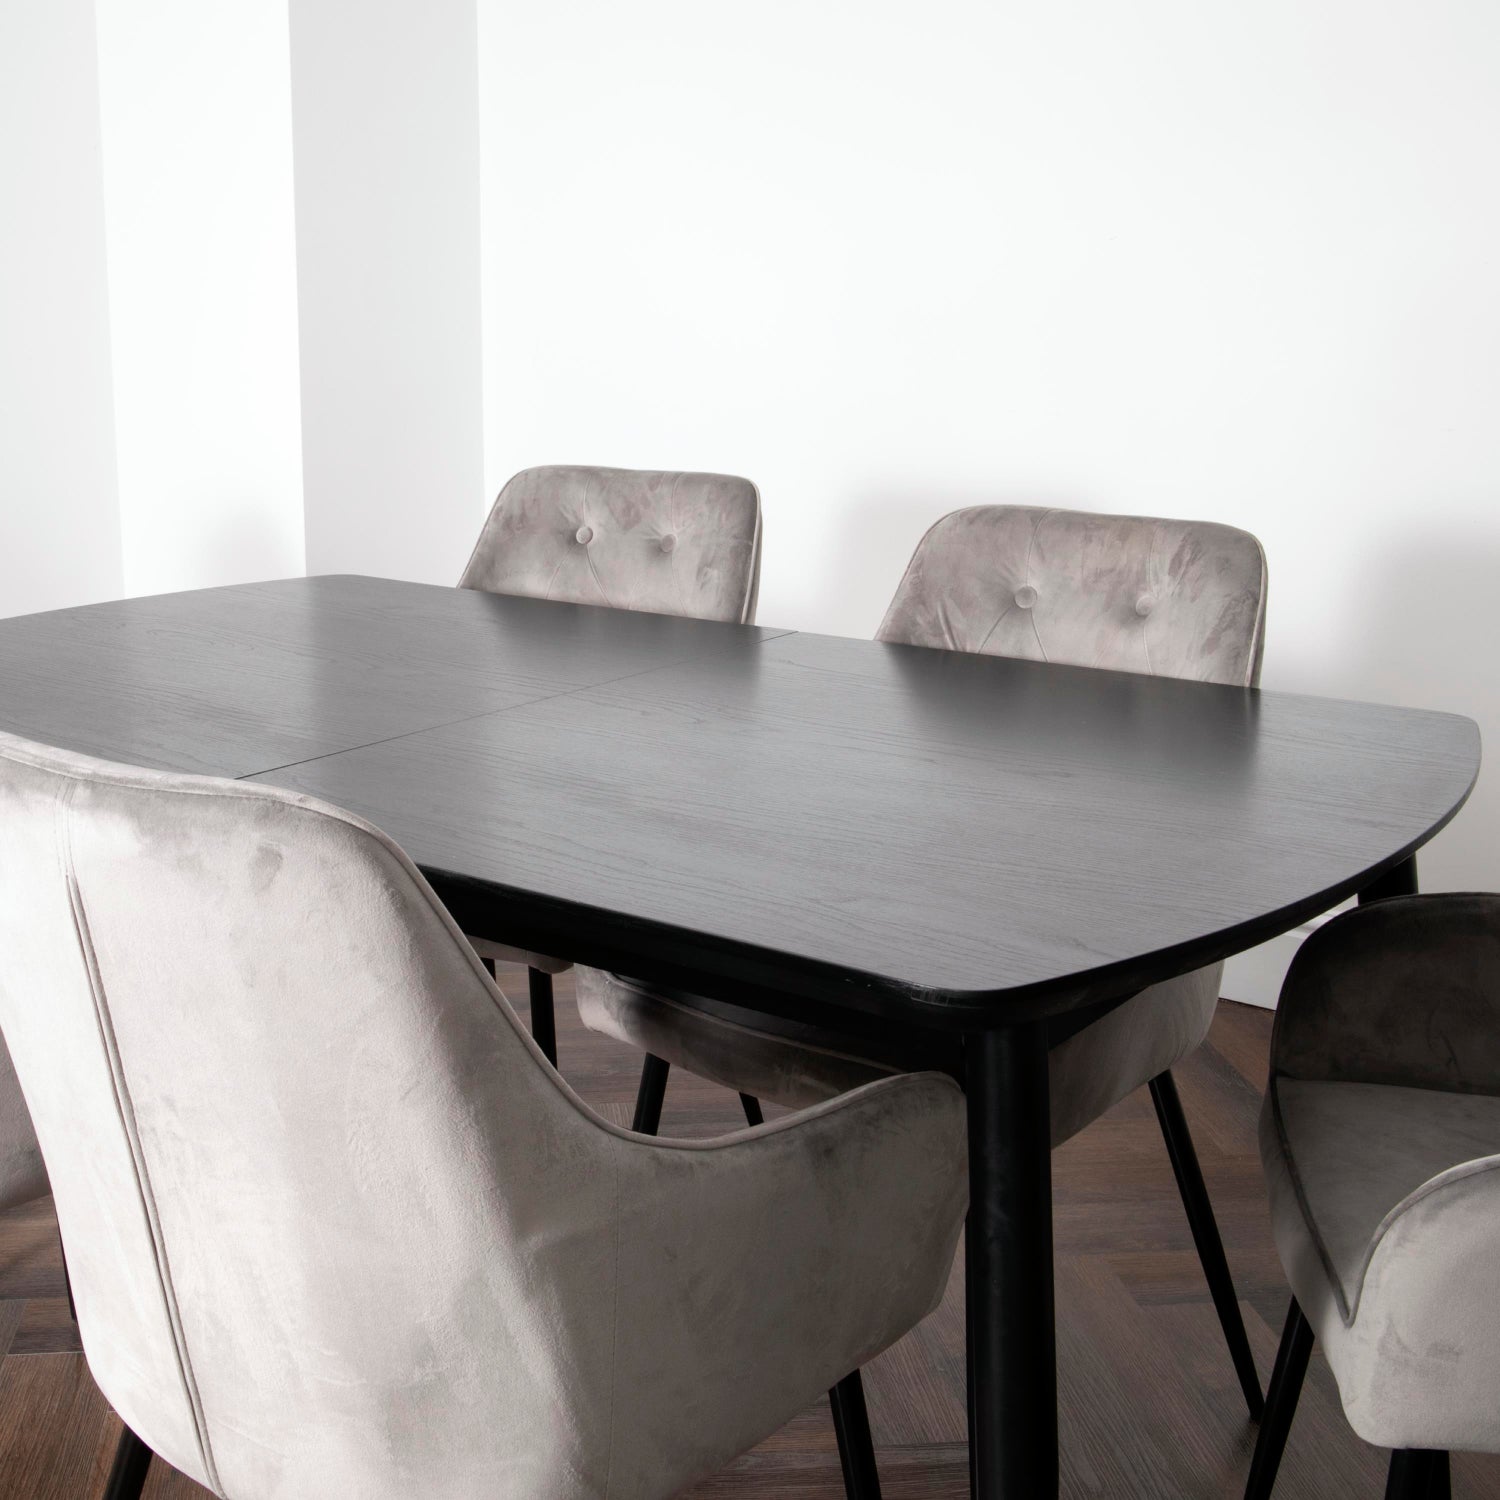 Oxford dark ash dining table by Native